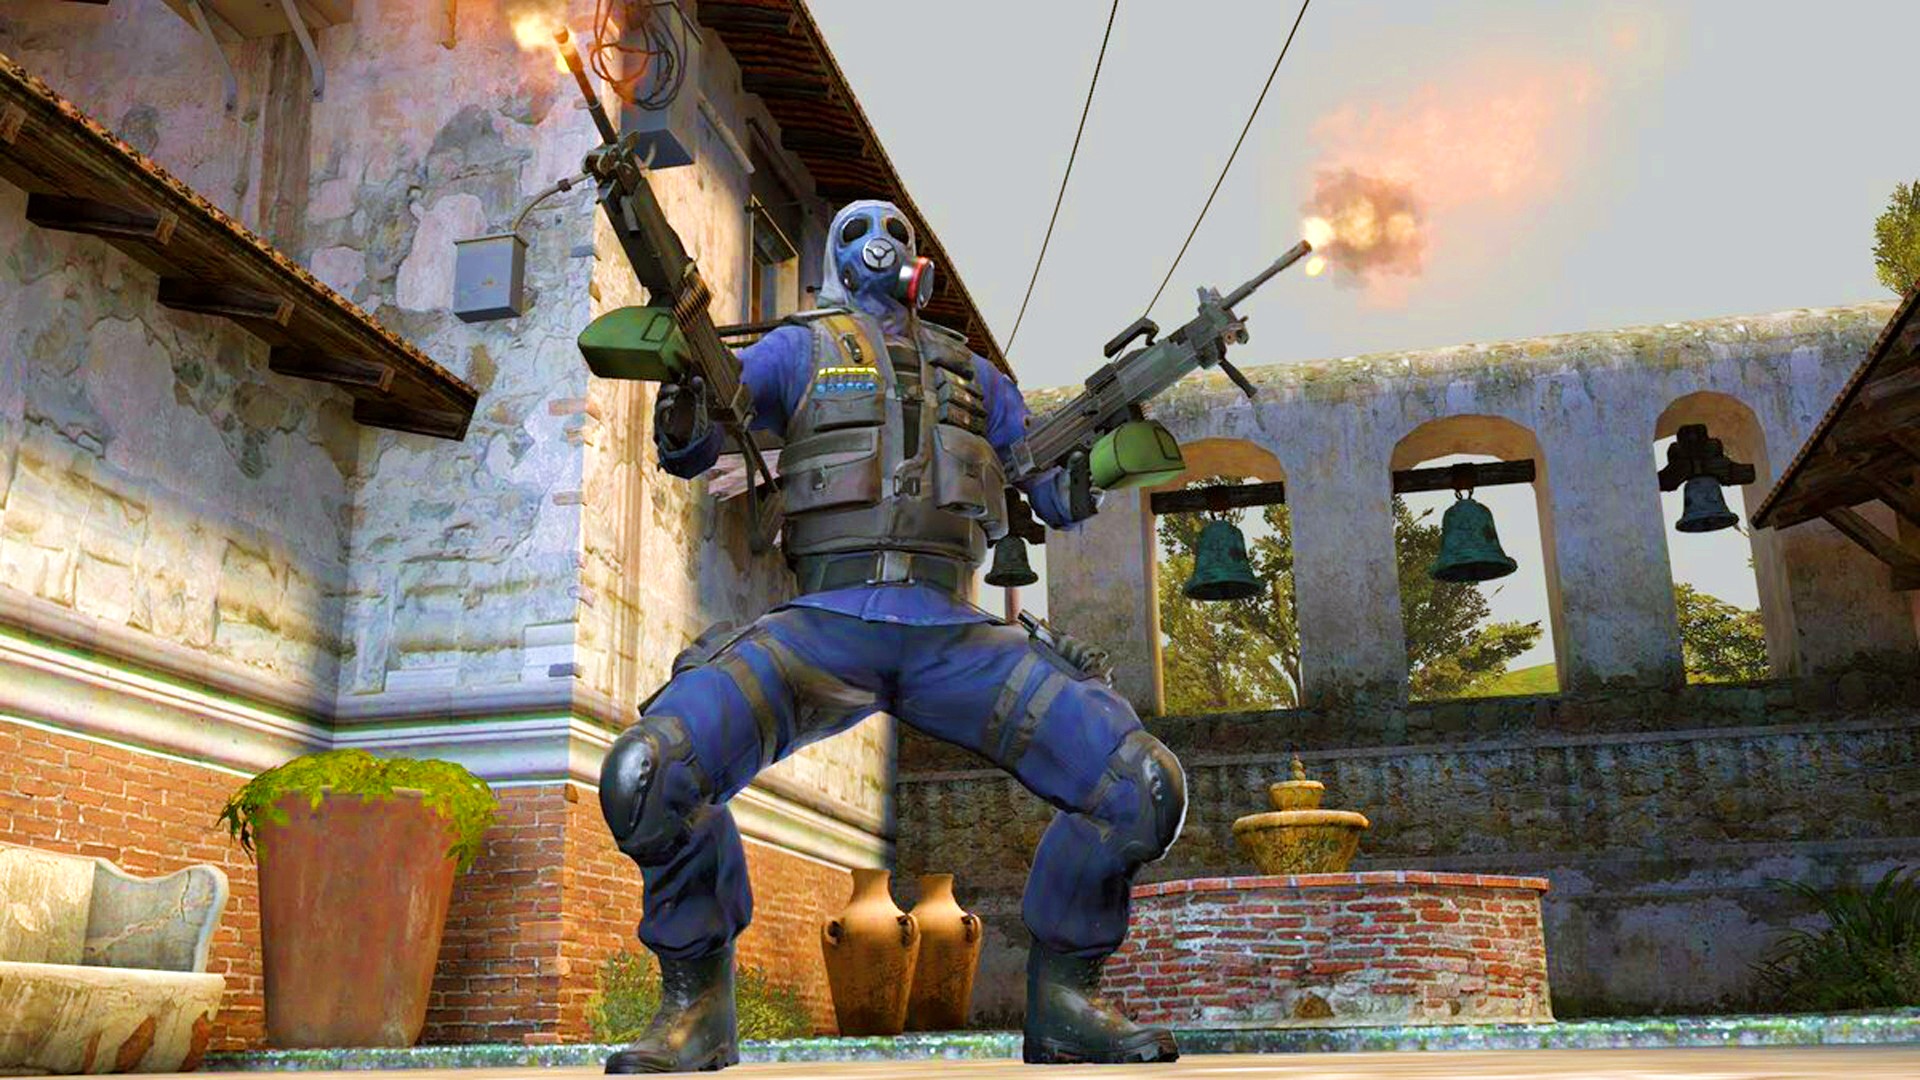 CS:GO skins have different hitboxes says player, causing P2W advantage